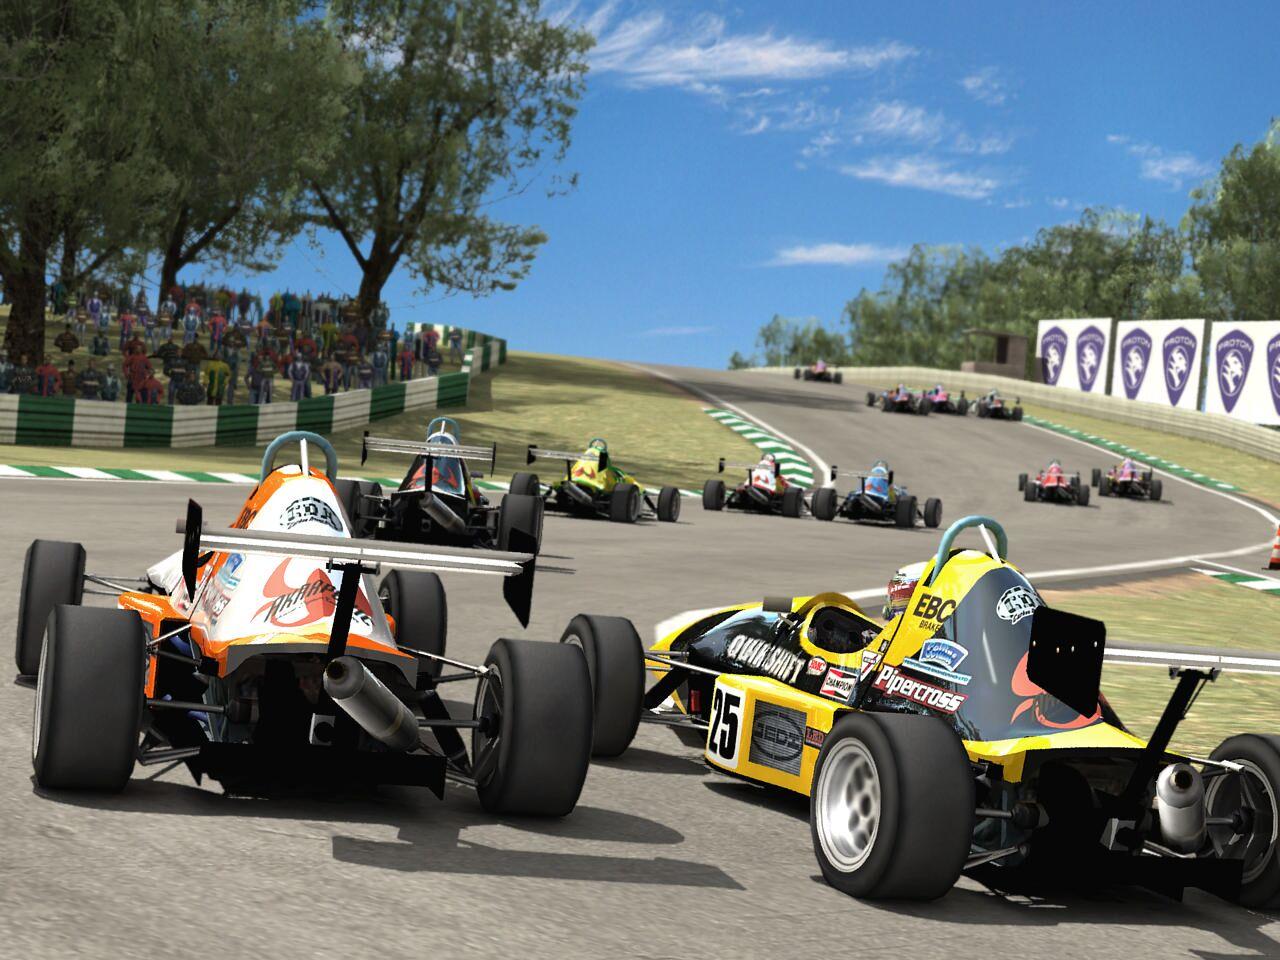 codemasters toca race driver 3 patch